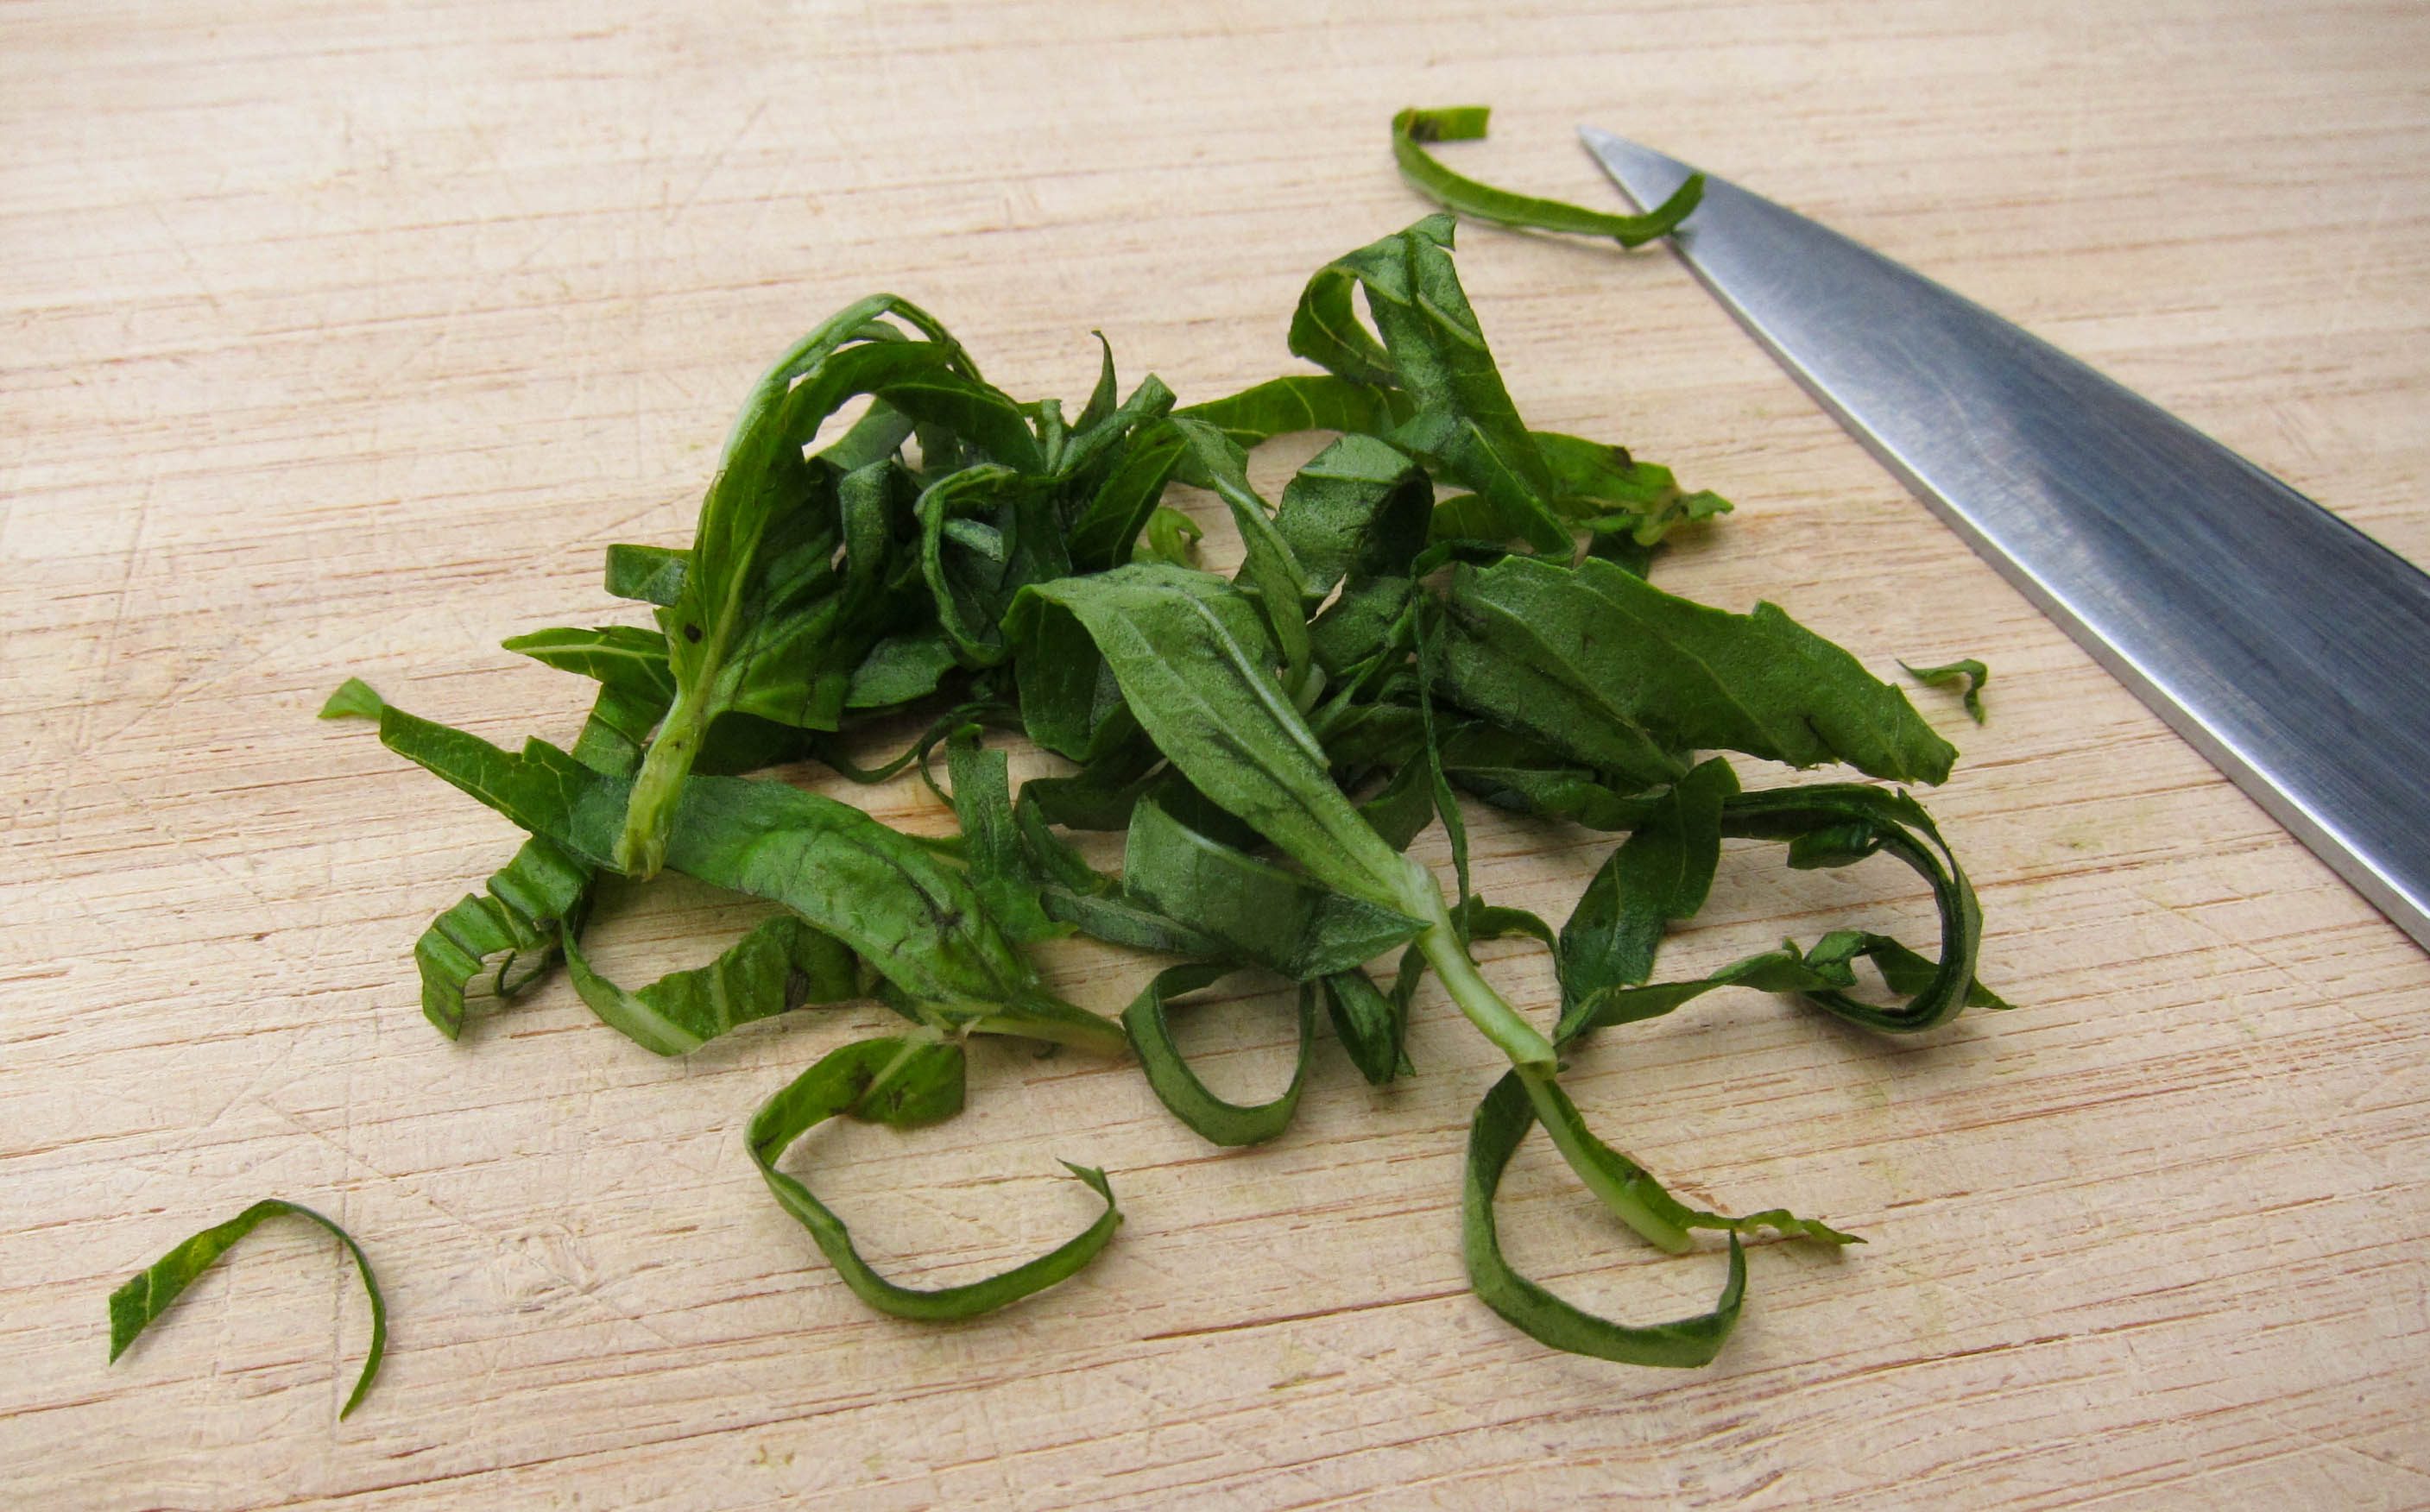 Basil cut up with knife,